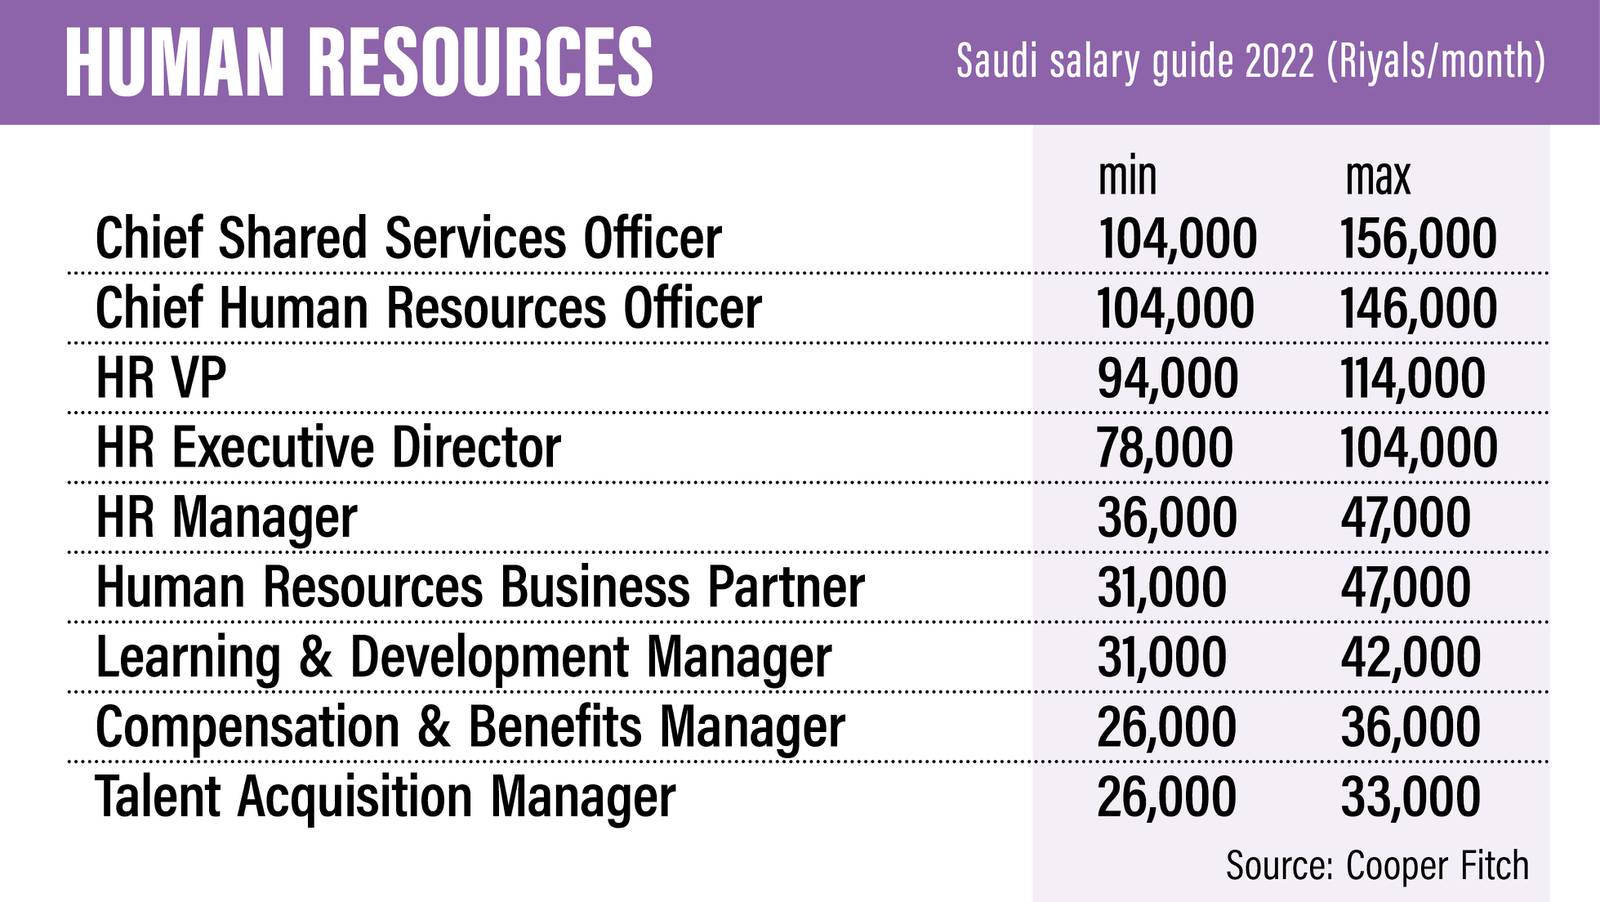 Saudi Arabia salary guide 2022 how much should you be earning?